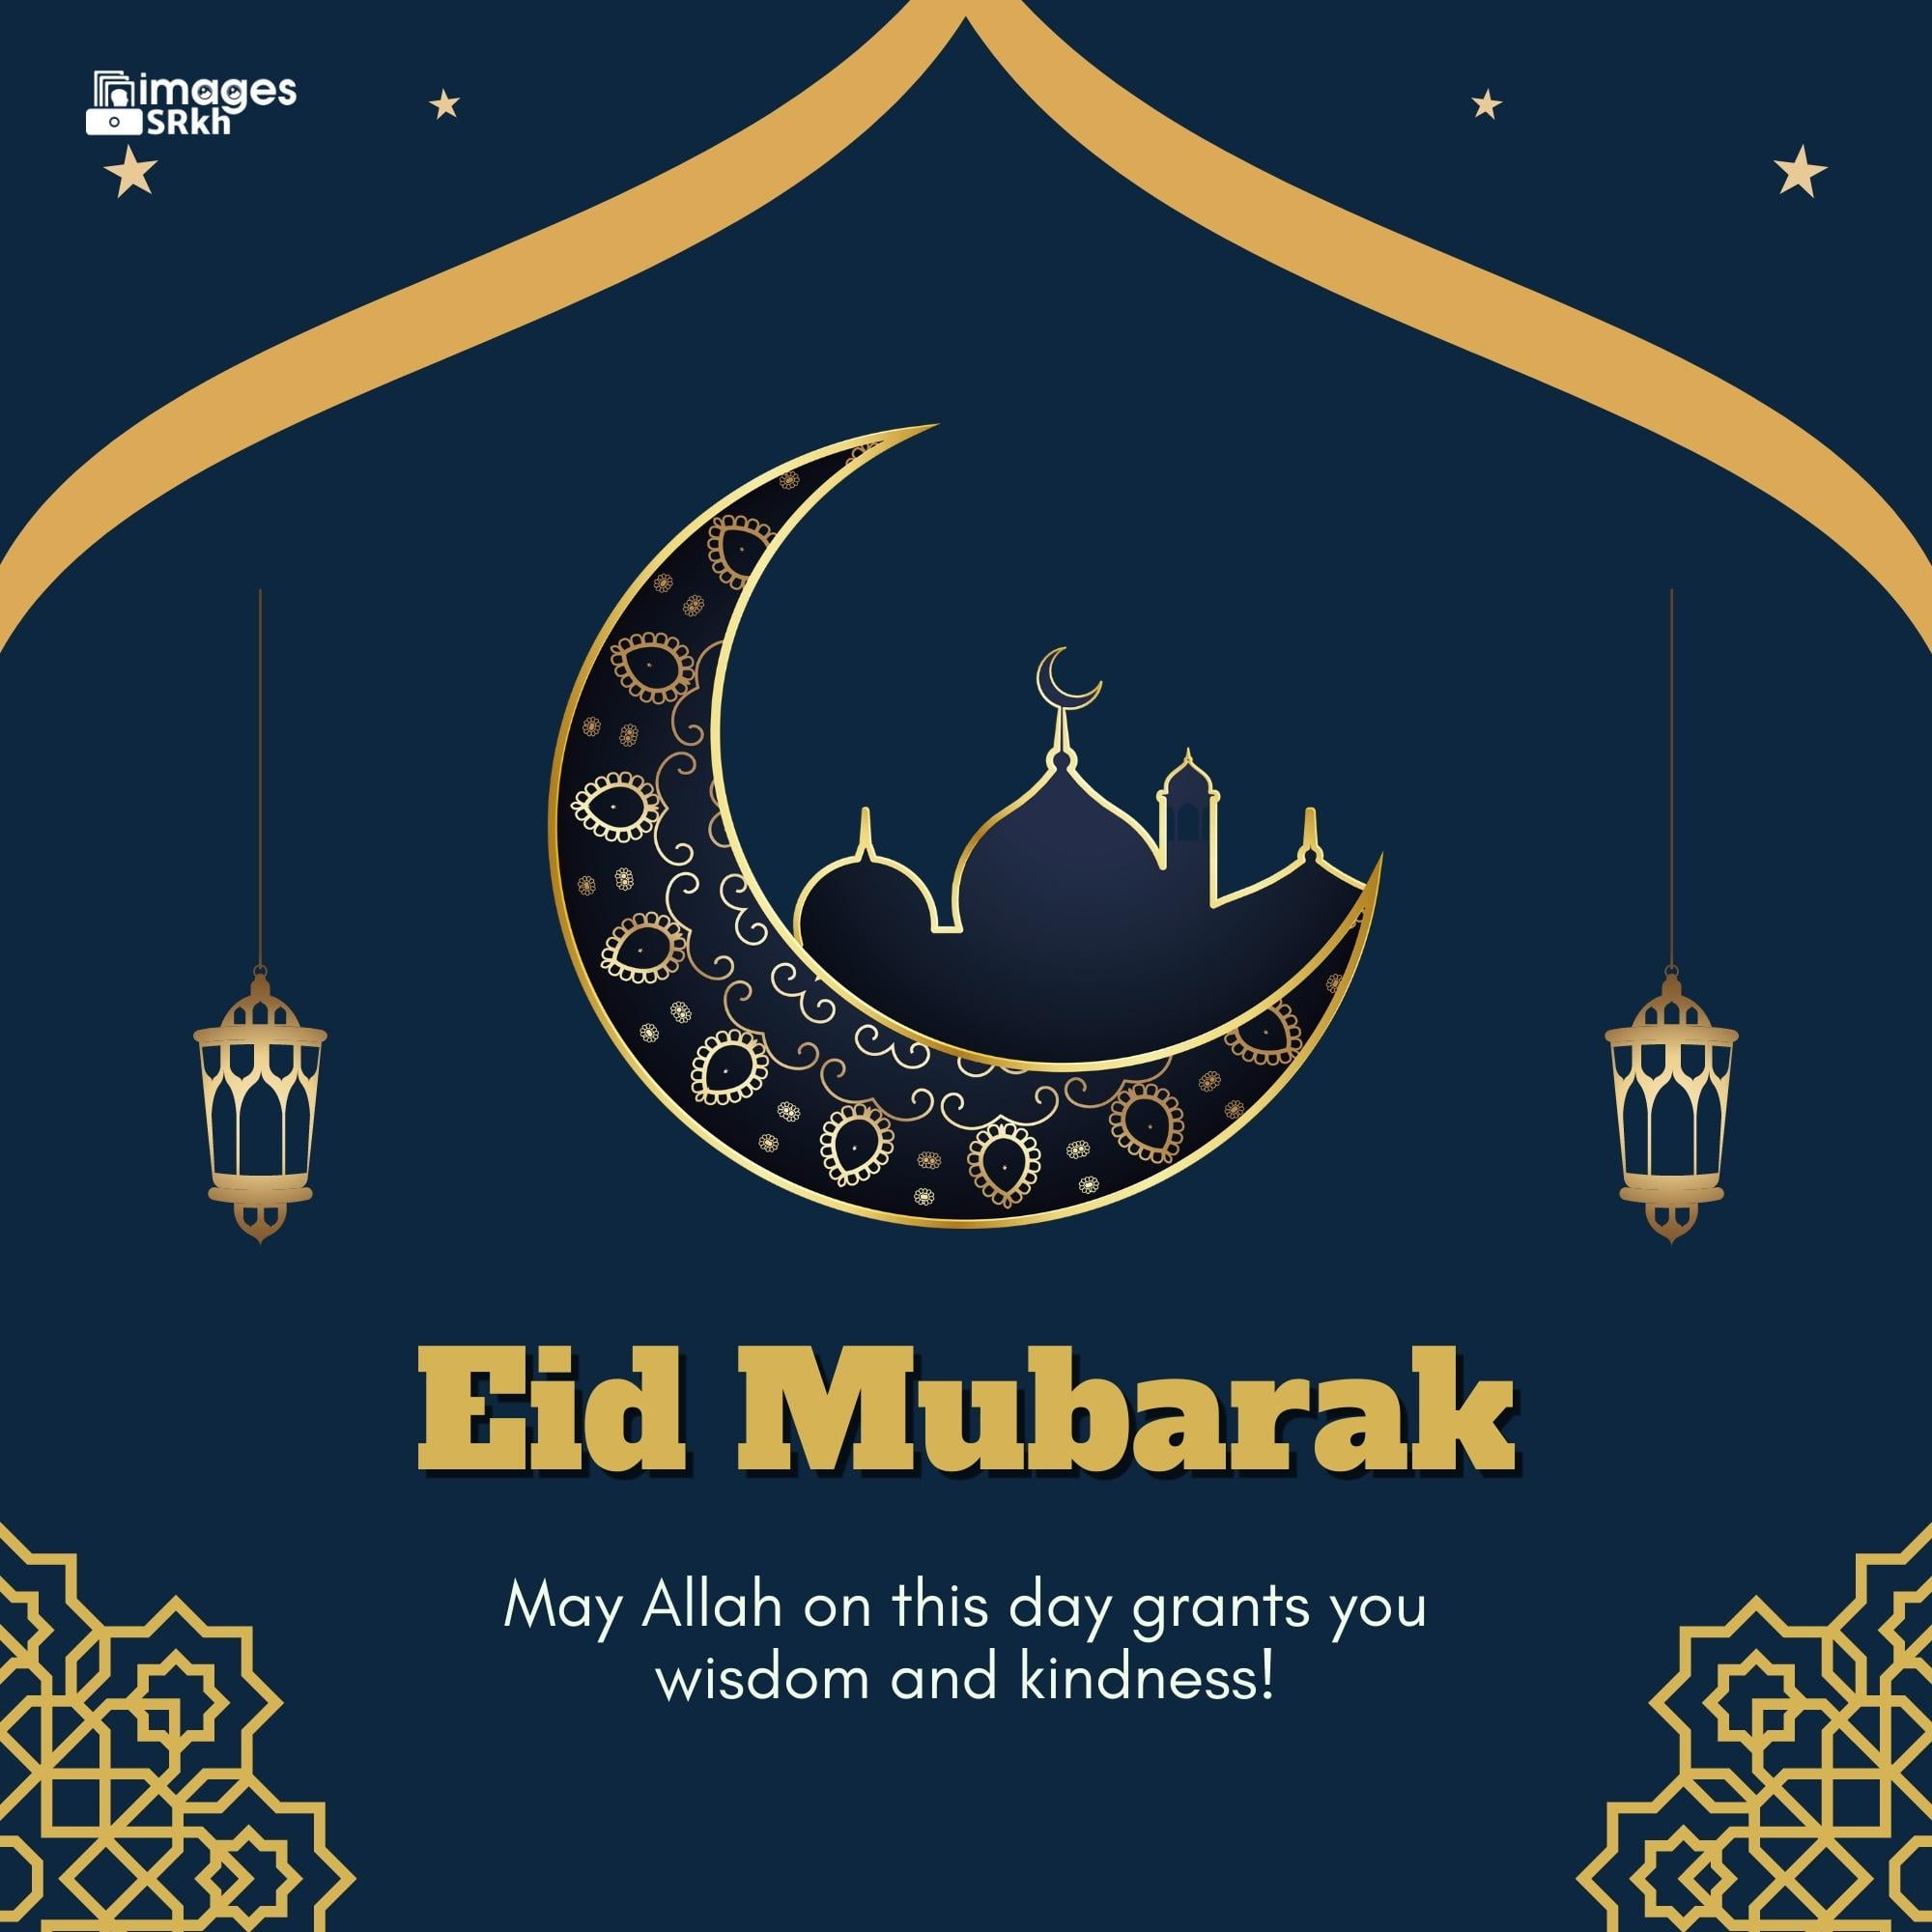 Wishes To Eid Mubarak (4) | Download free in Hd Quality | imagesSRkh